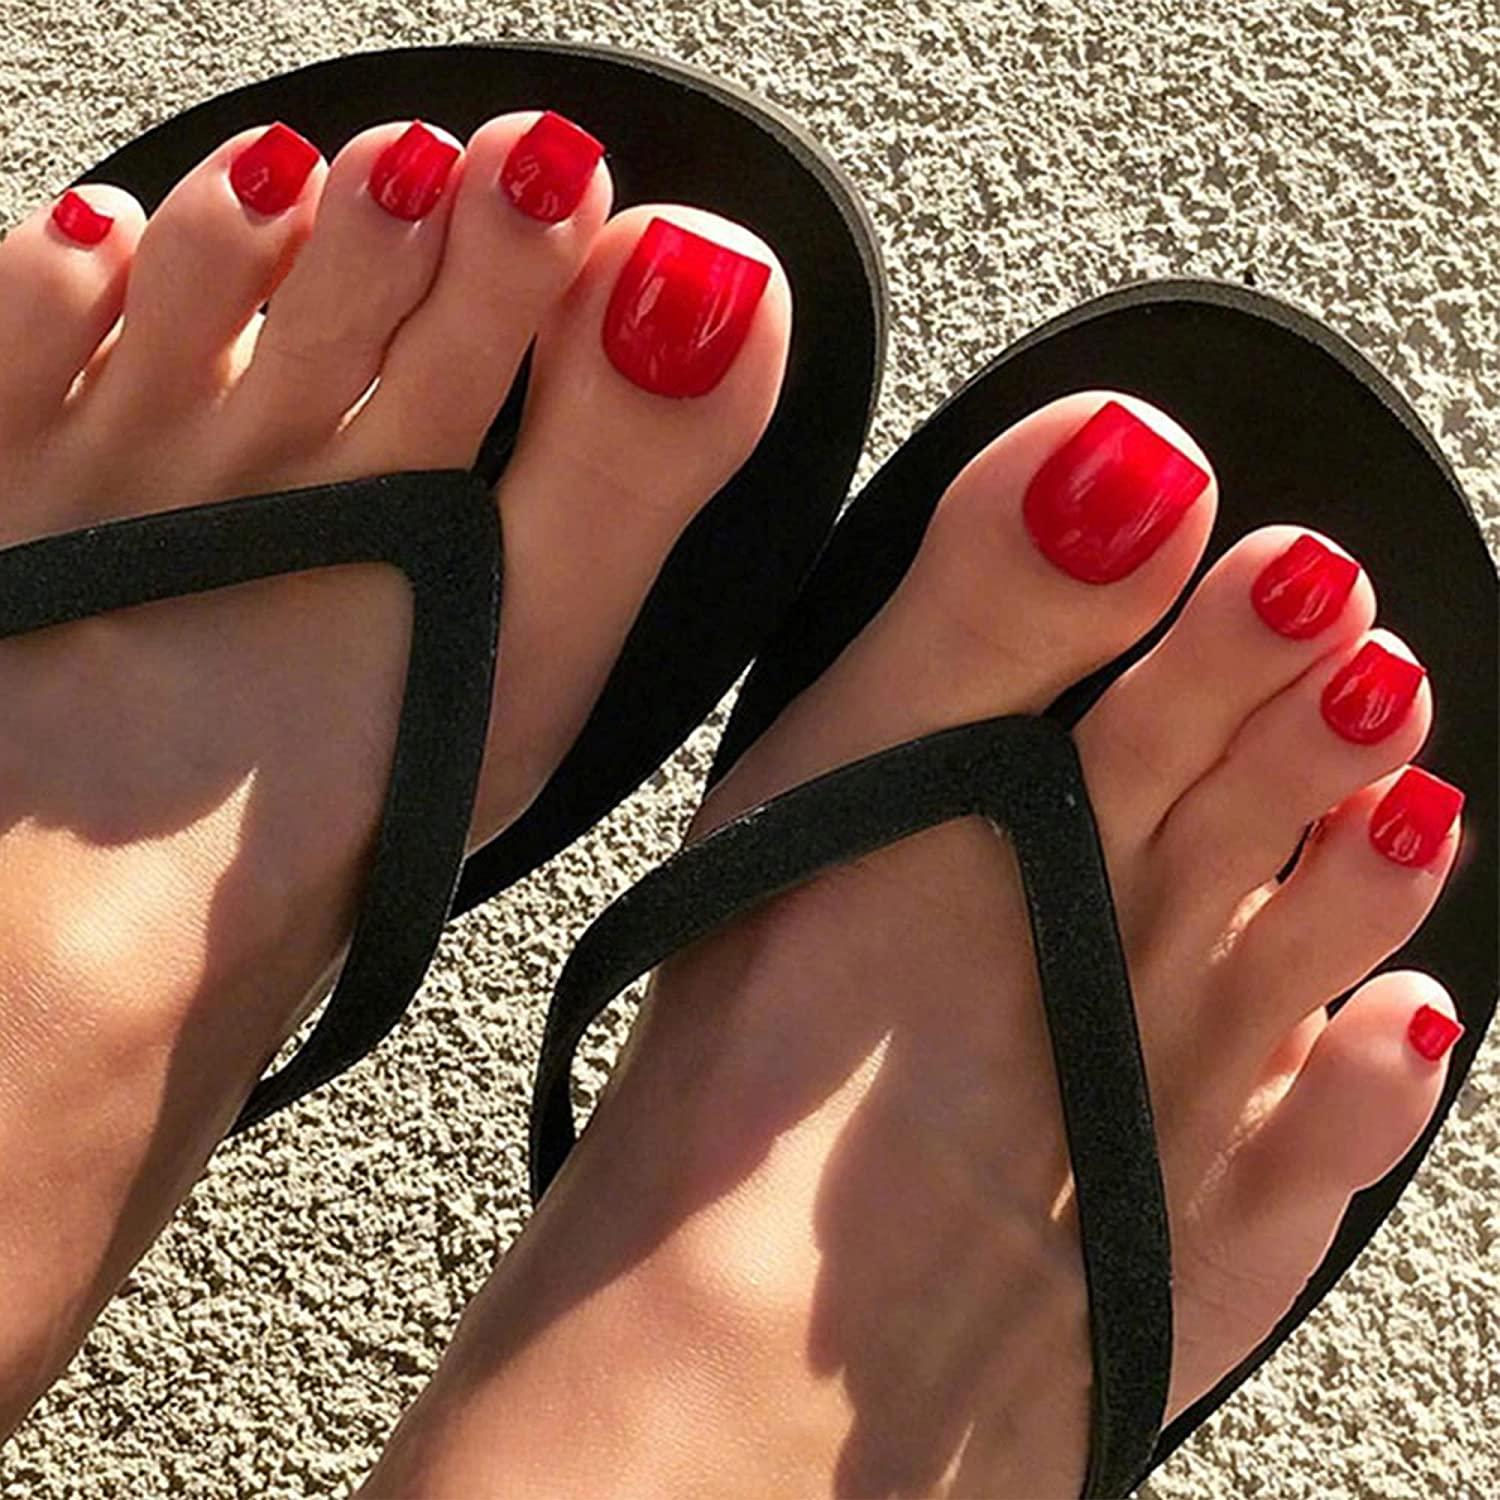 Why are my toenails discolored?